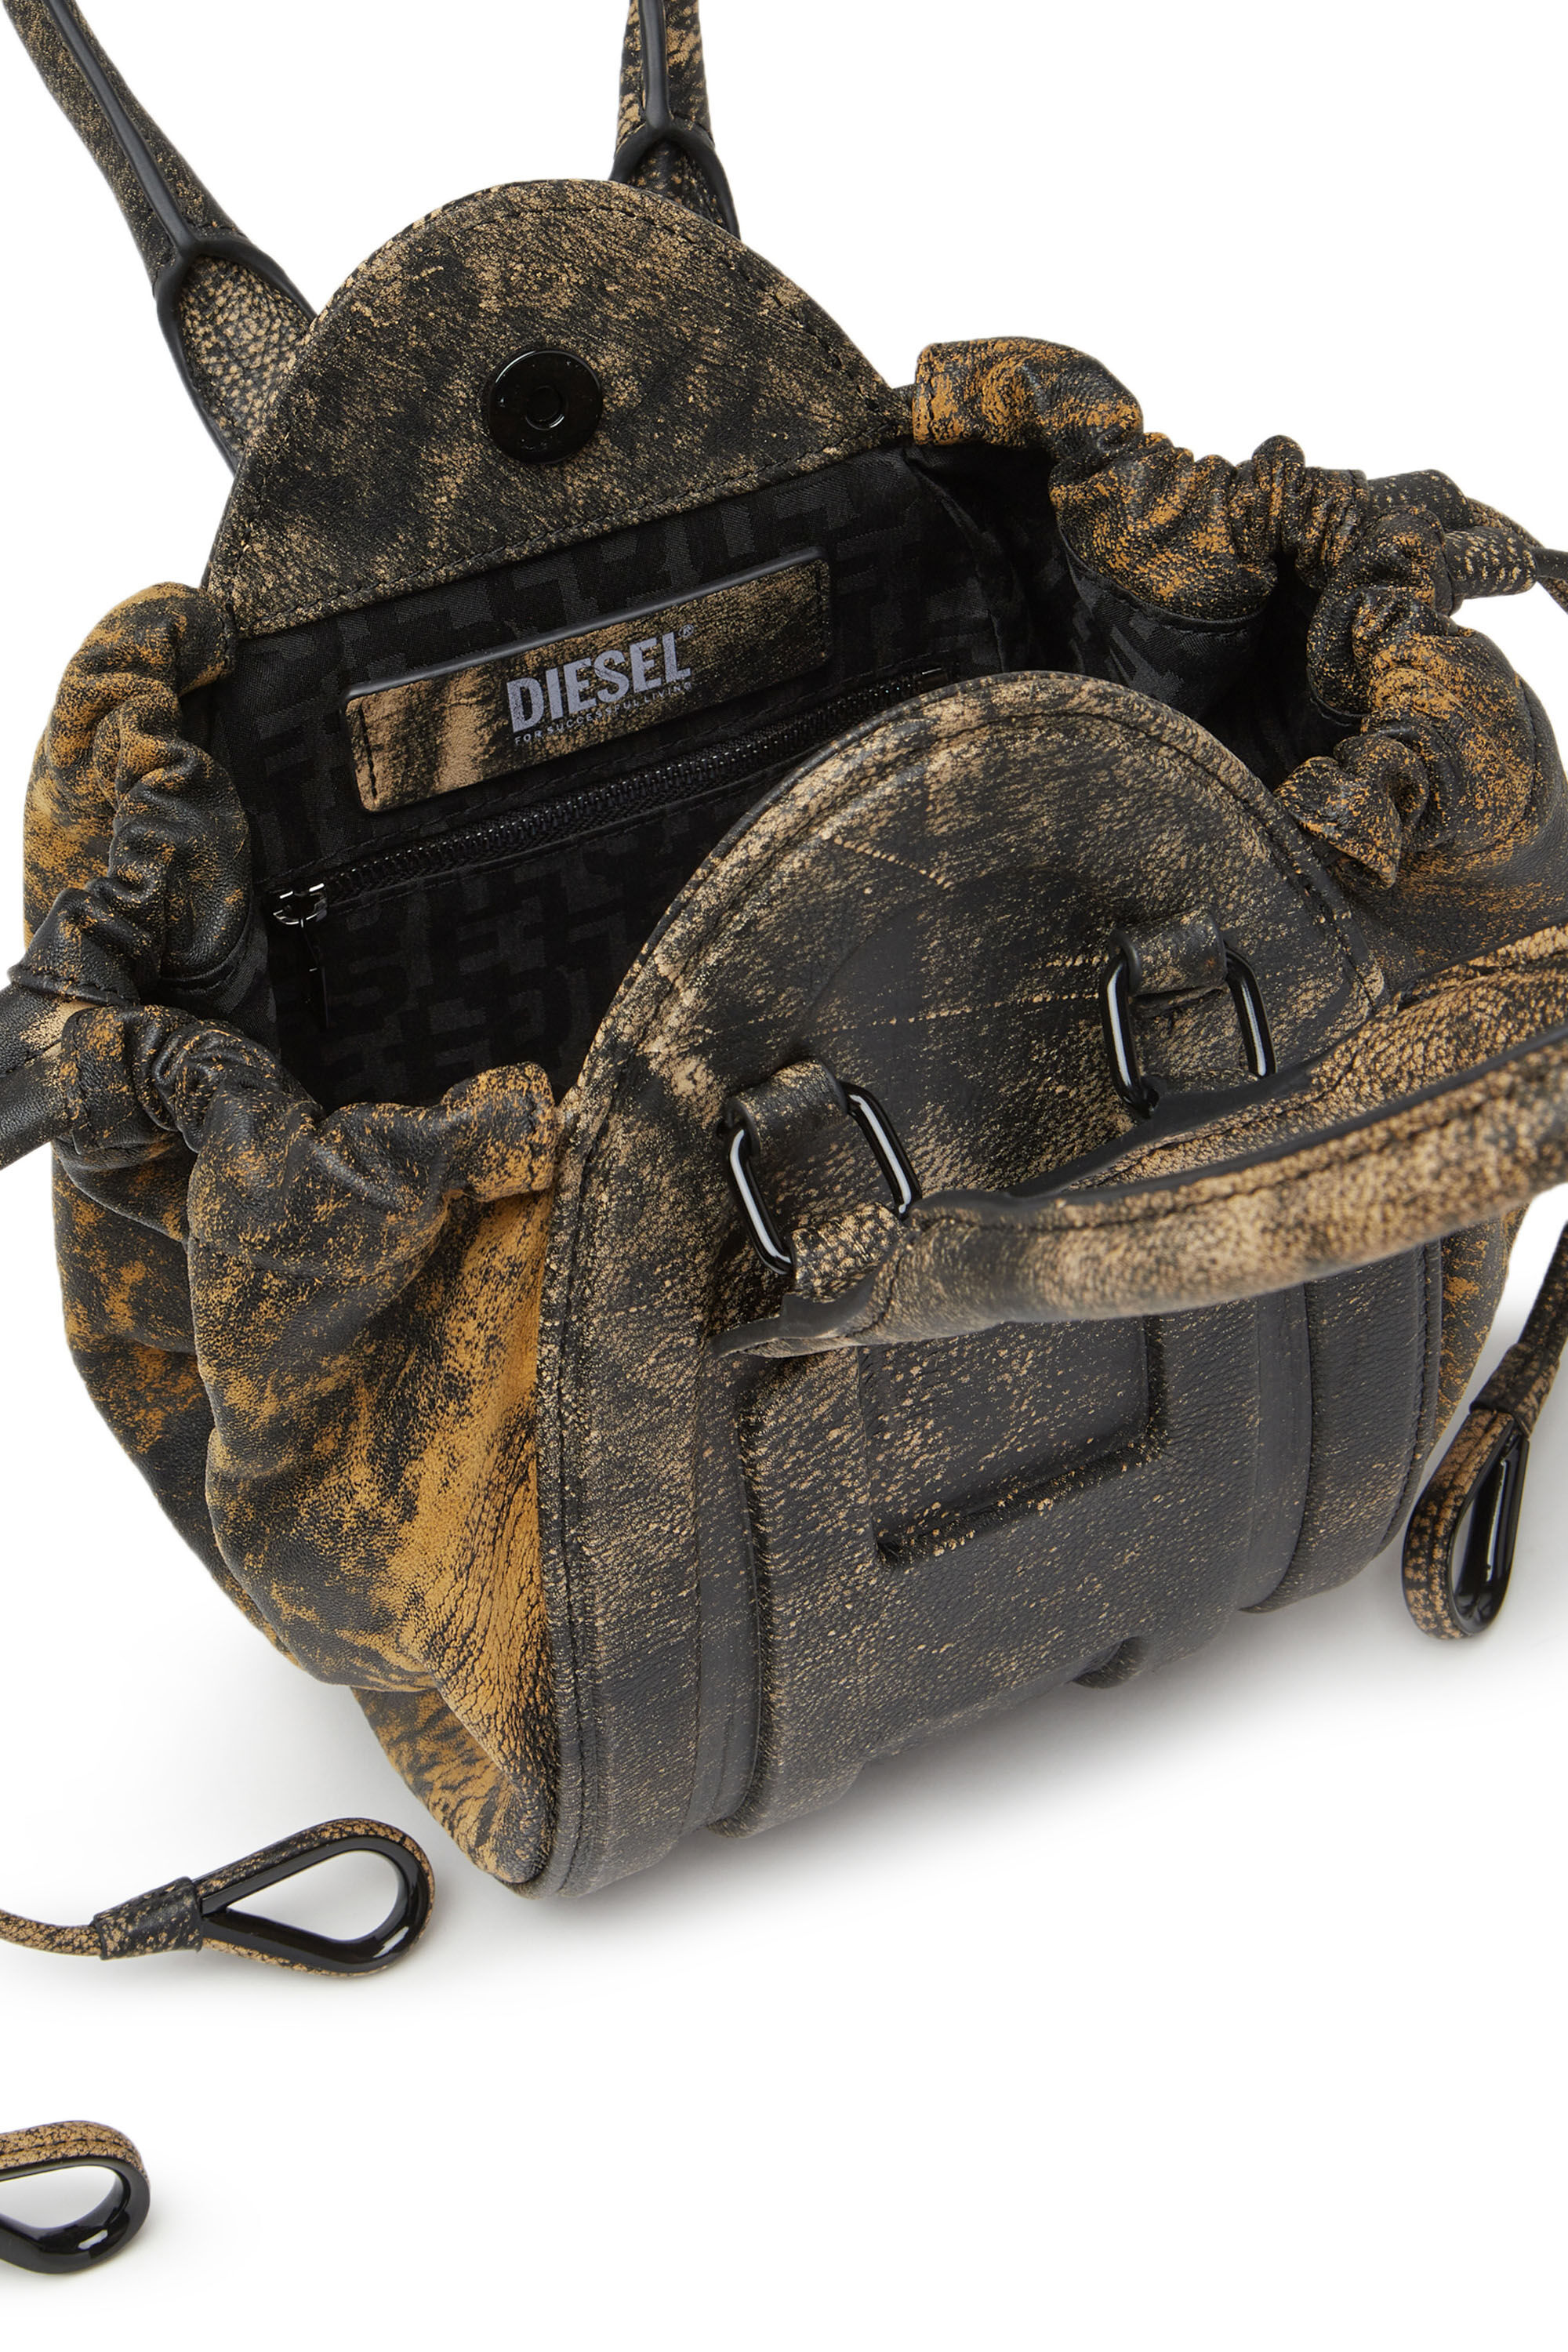 Diesel - 1DR-FOLD XS, Woman 1DR-Fold XS - Oval logo handbag in marbled leather in Brown - Image 5